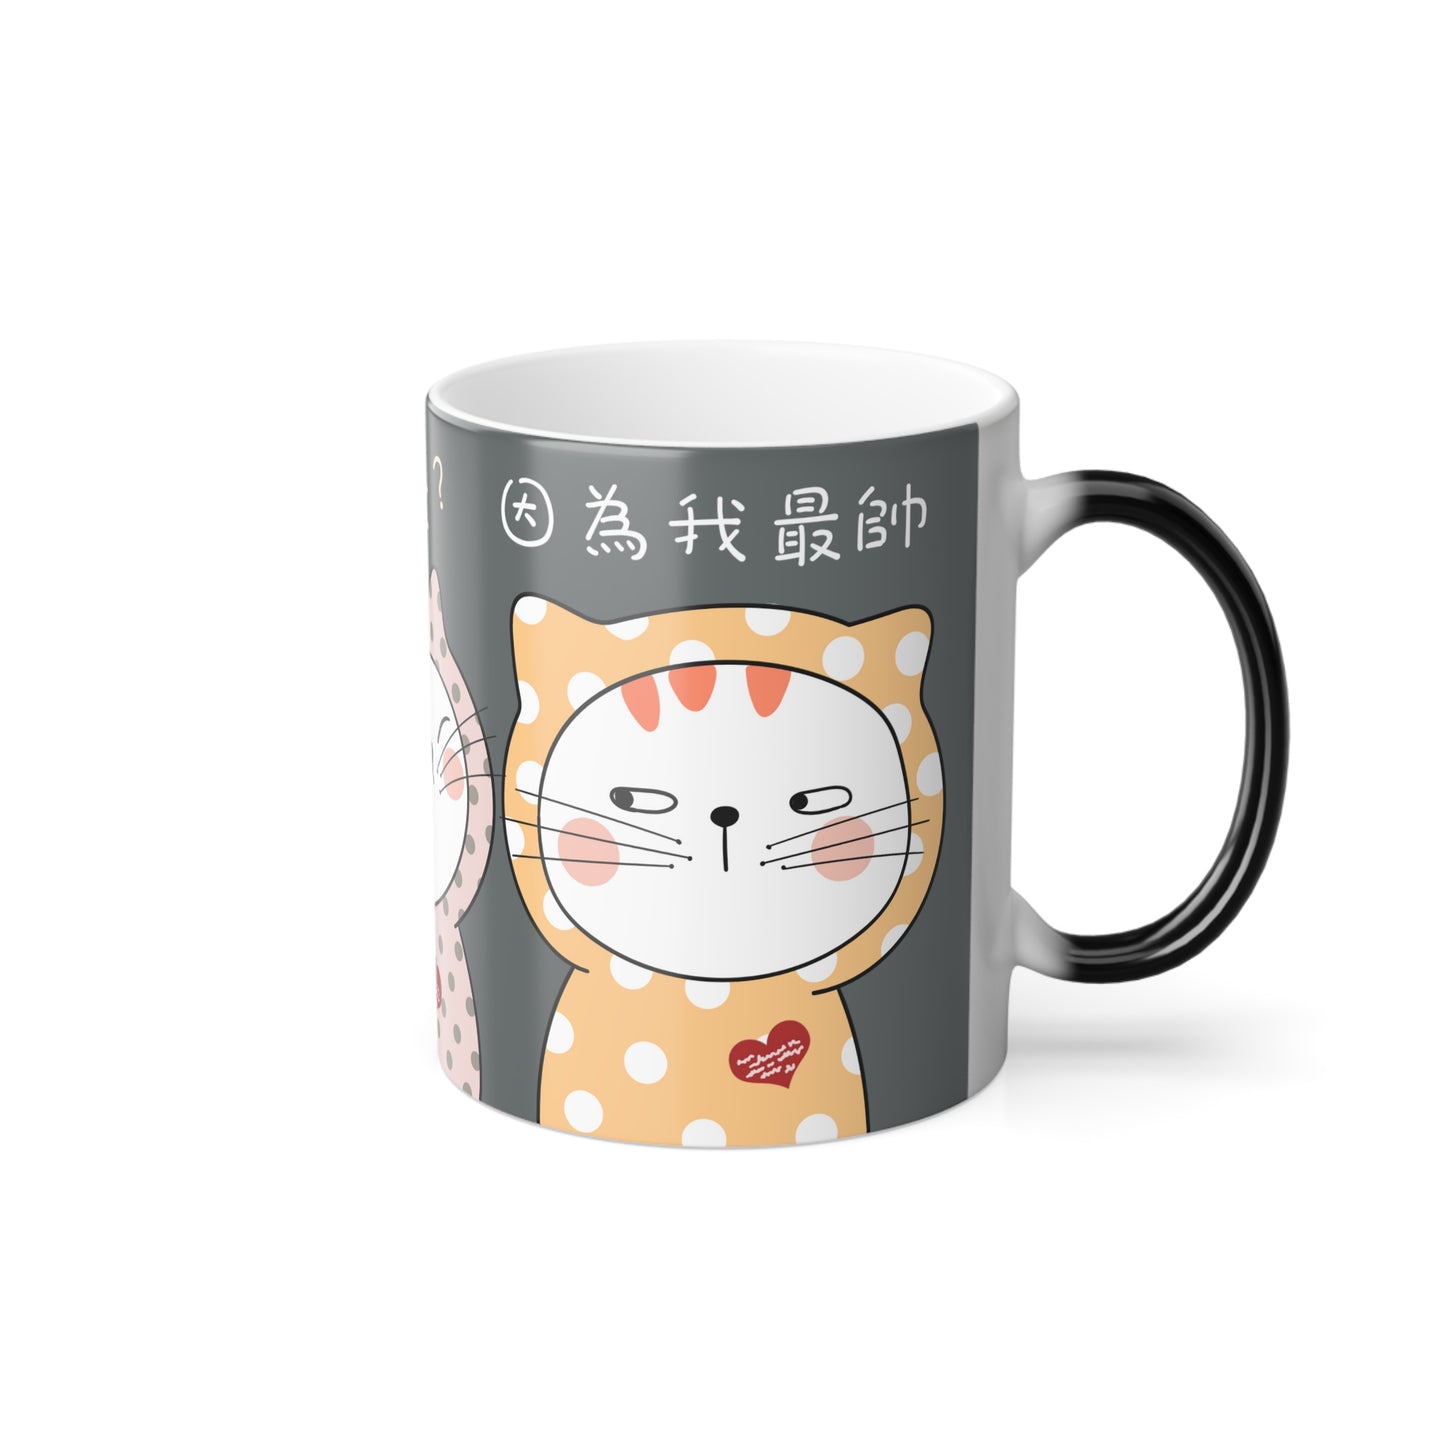 Don't look at me! Why? Because I'm the best looking! Cats 11oz Color Heat Changing Mug Chinese Characters